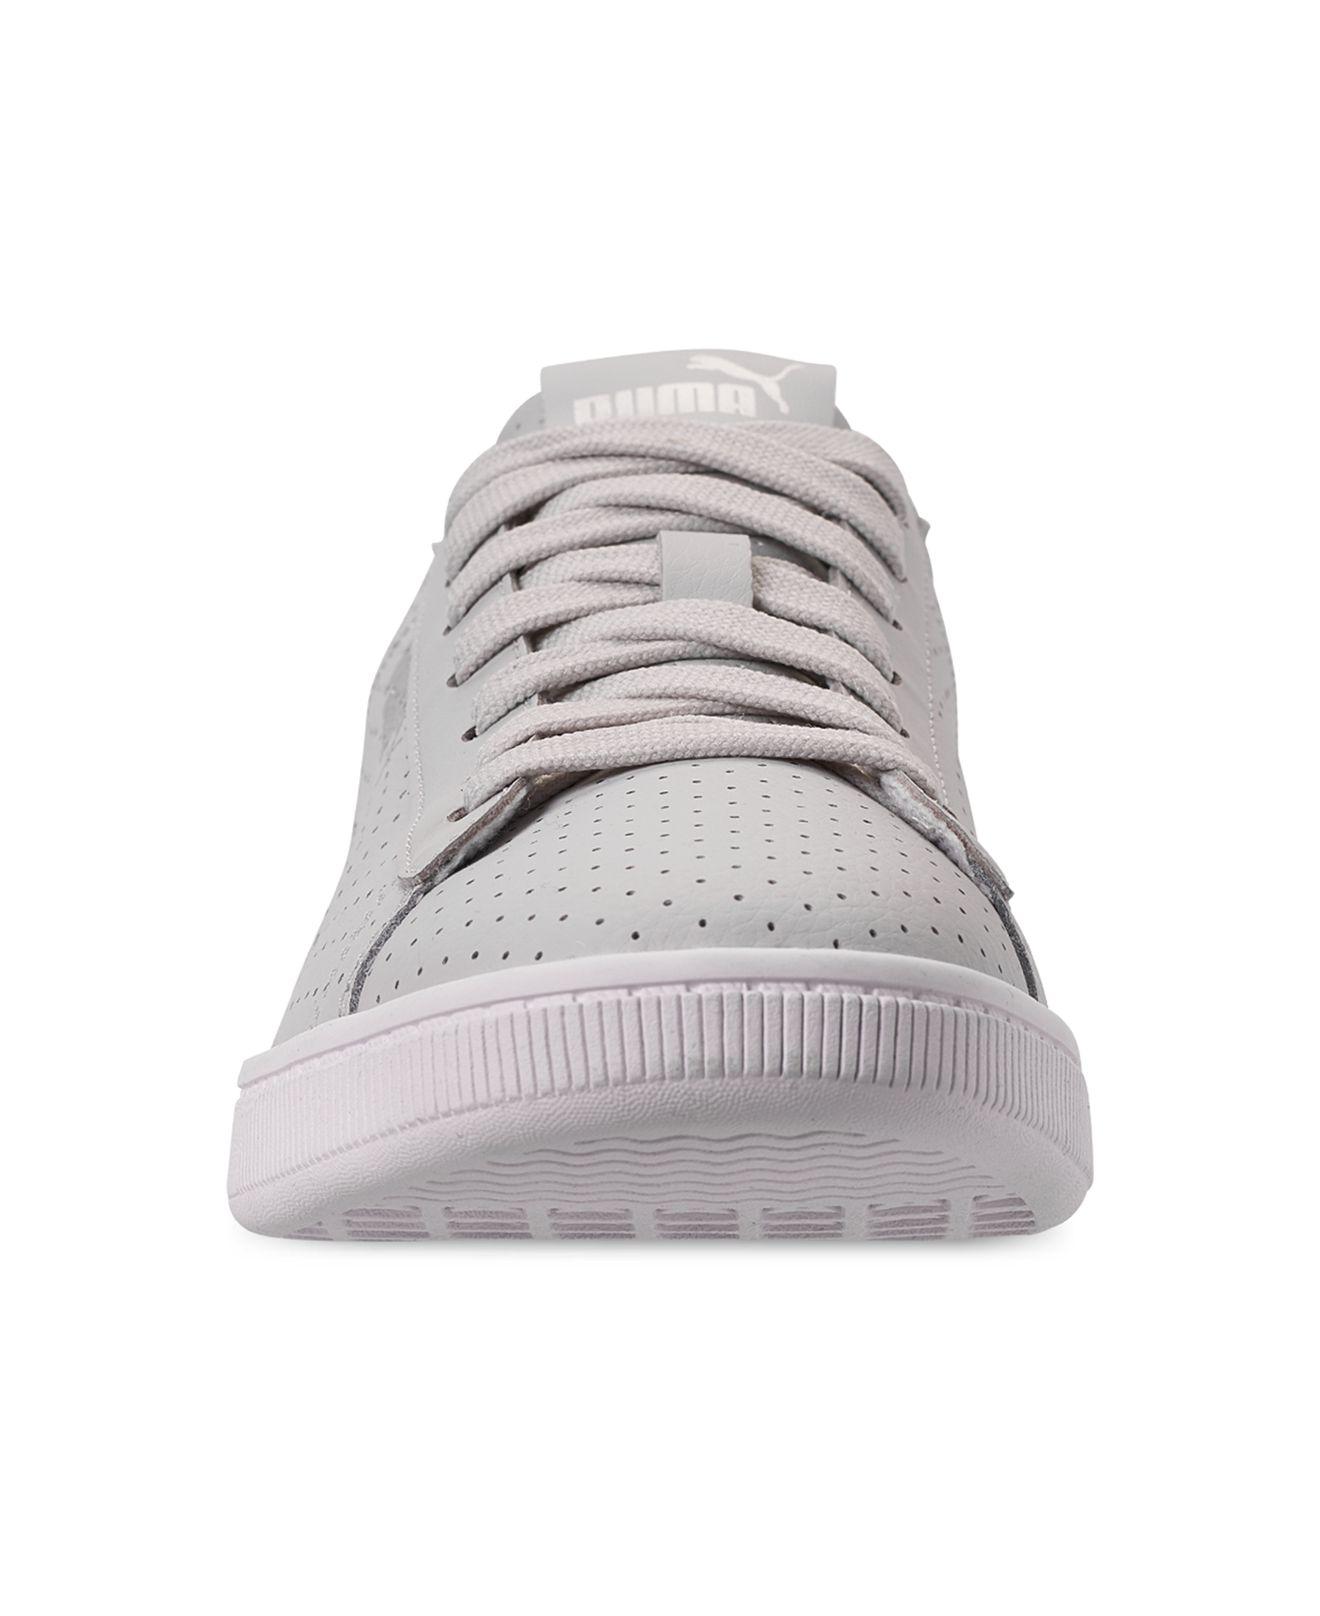 Vikky Perf V2 Casual Sneakers 